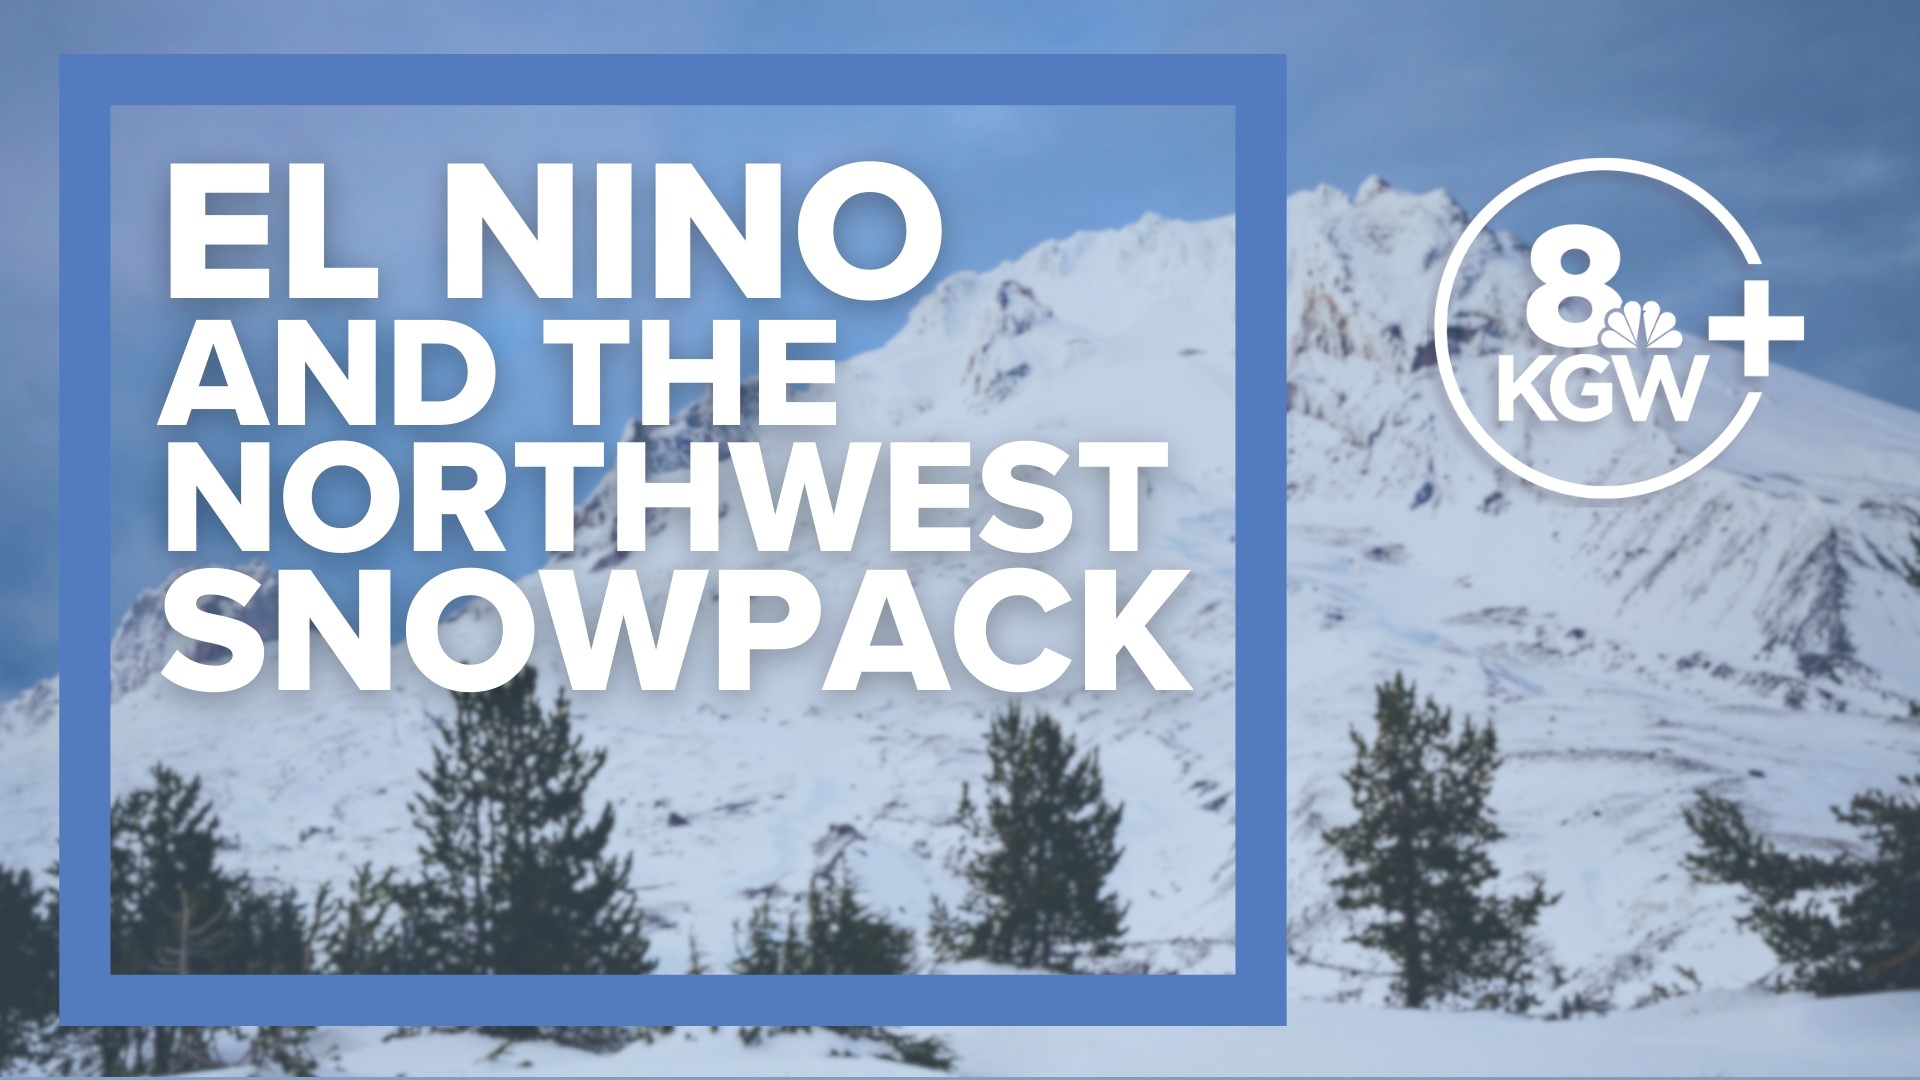 Matt Zaffino talks about snowpack predictions for the northwest with an El Nino in effect and what to plan for at regional ski areas